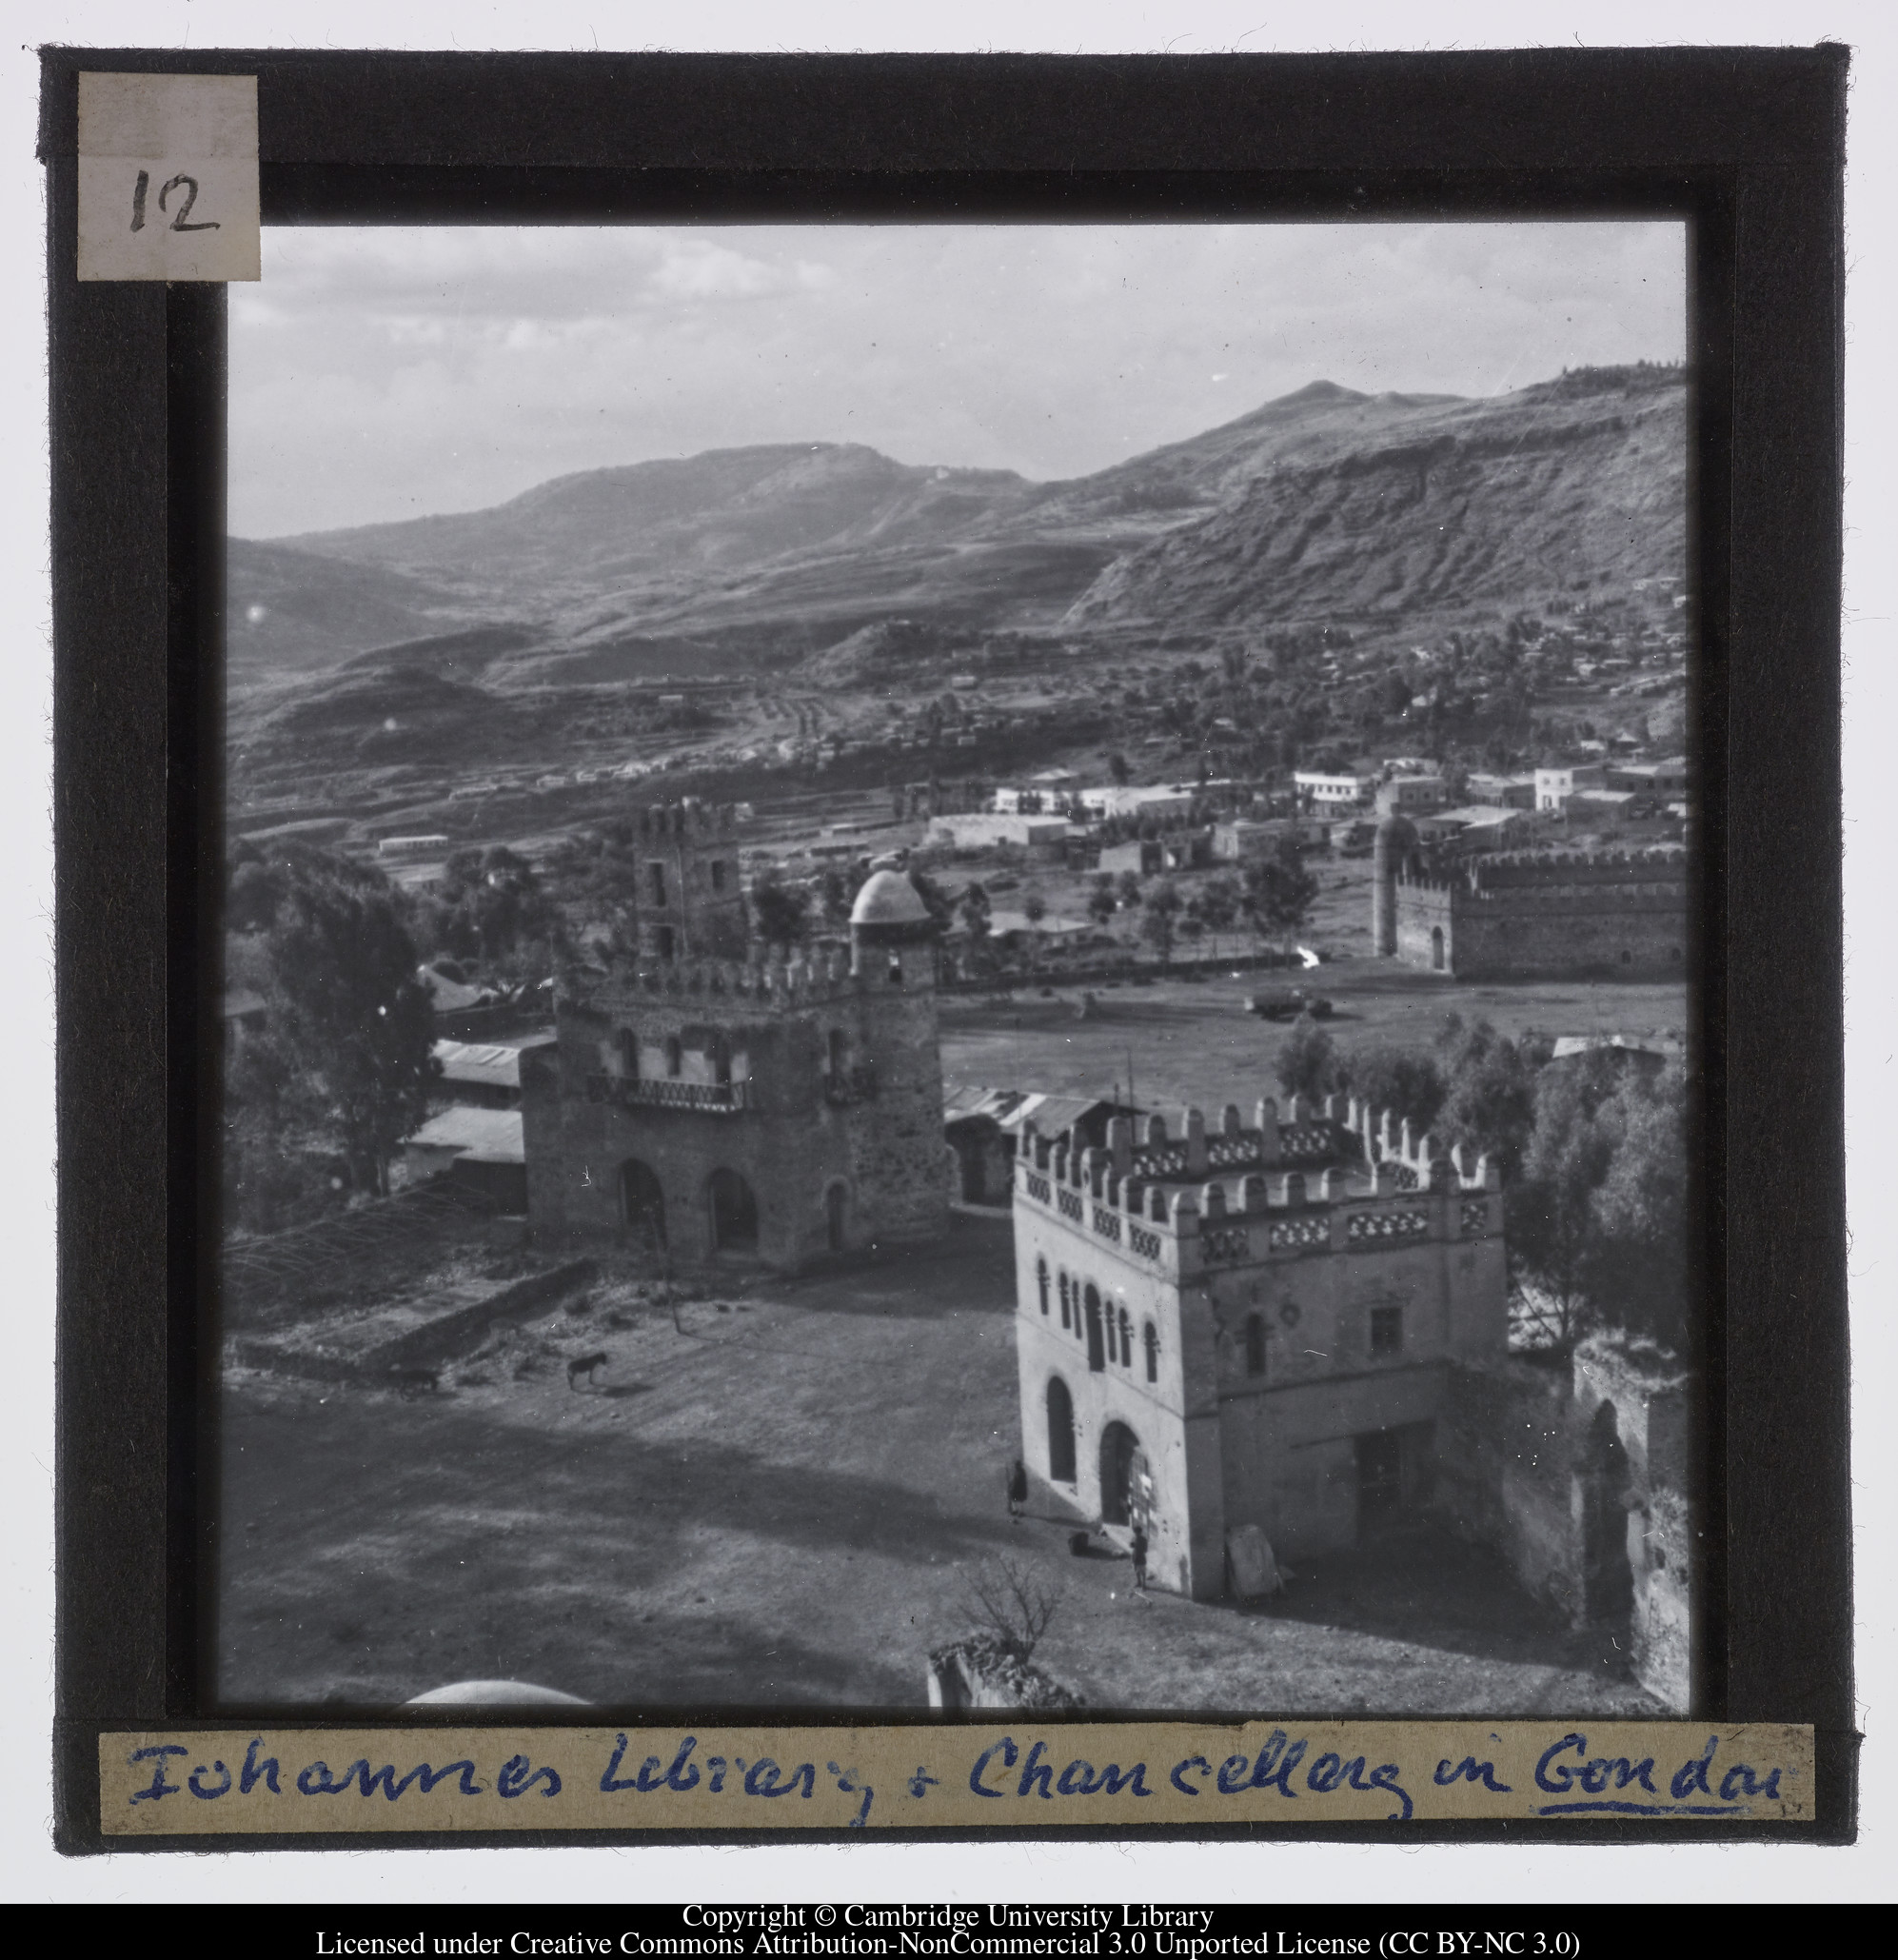 Iohawries library and chancellery in Gondar [i.e. Gonder], 1943